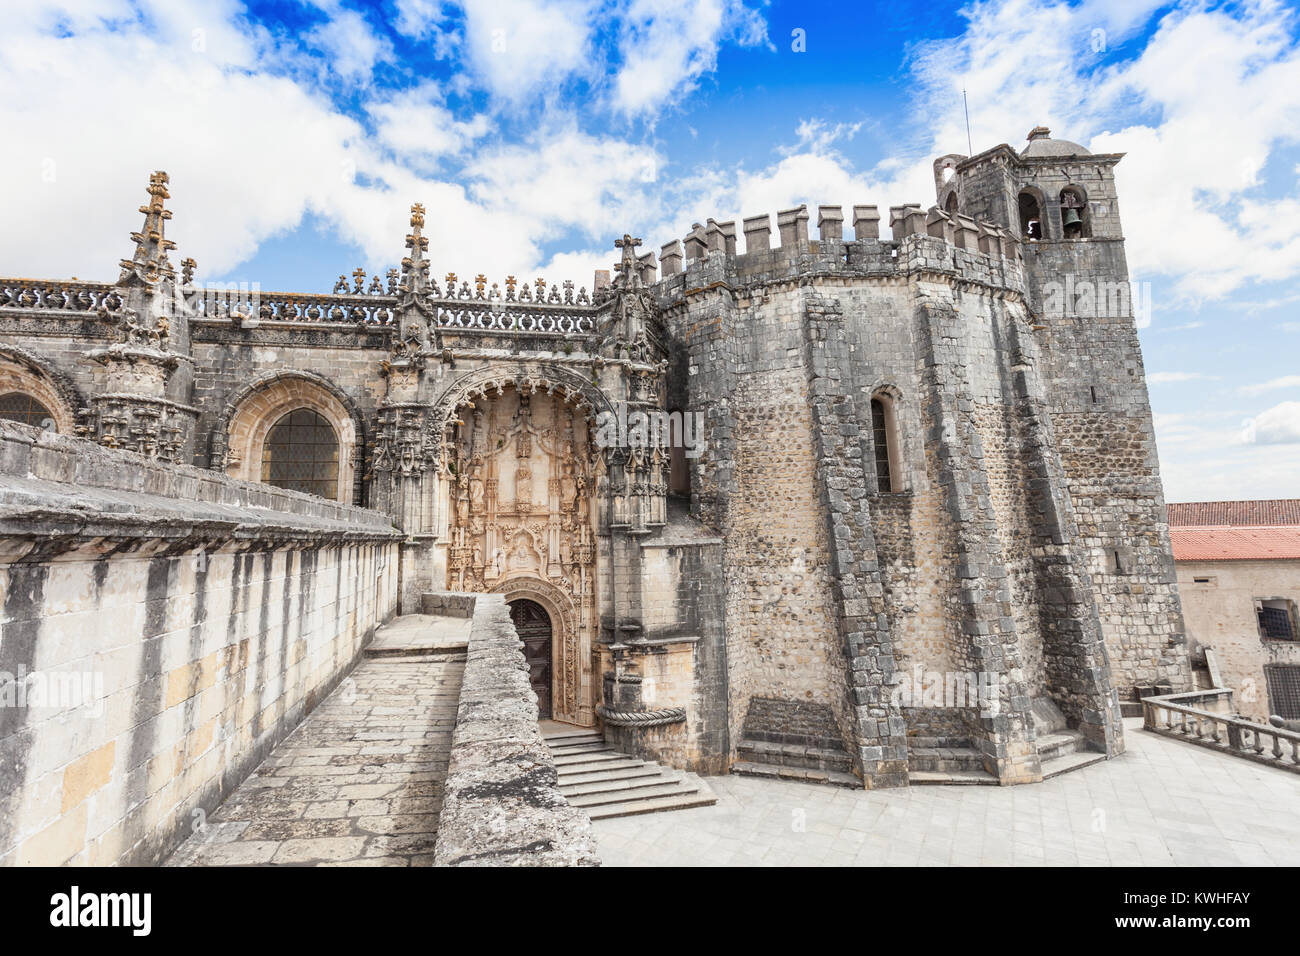 The Convent of the Order of Christ is a religious building and Roman Catholic building in Tomar, Portugal Stock Photo